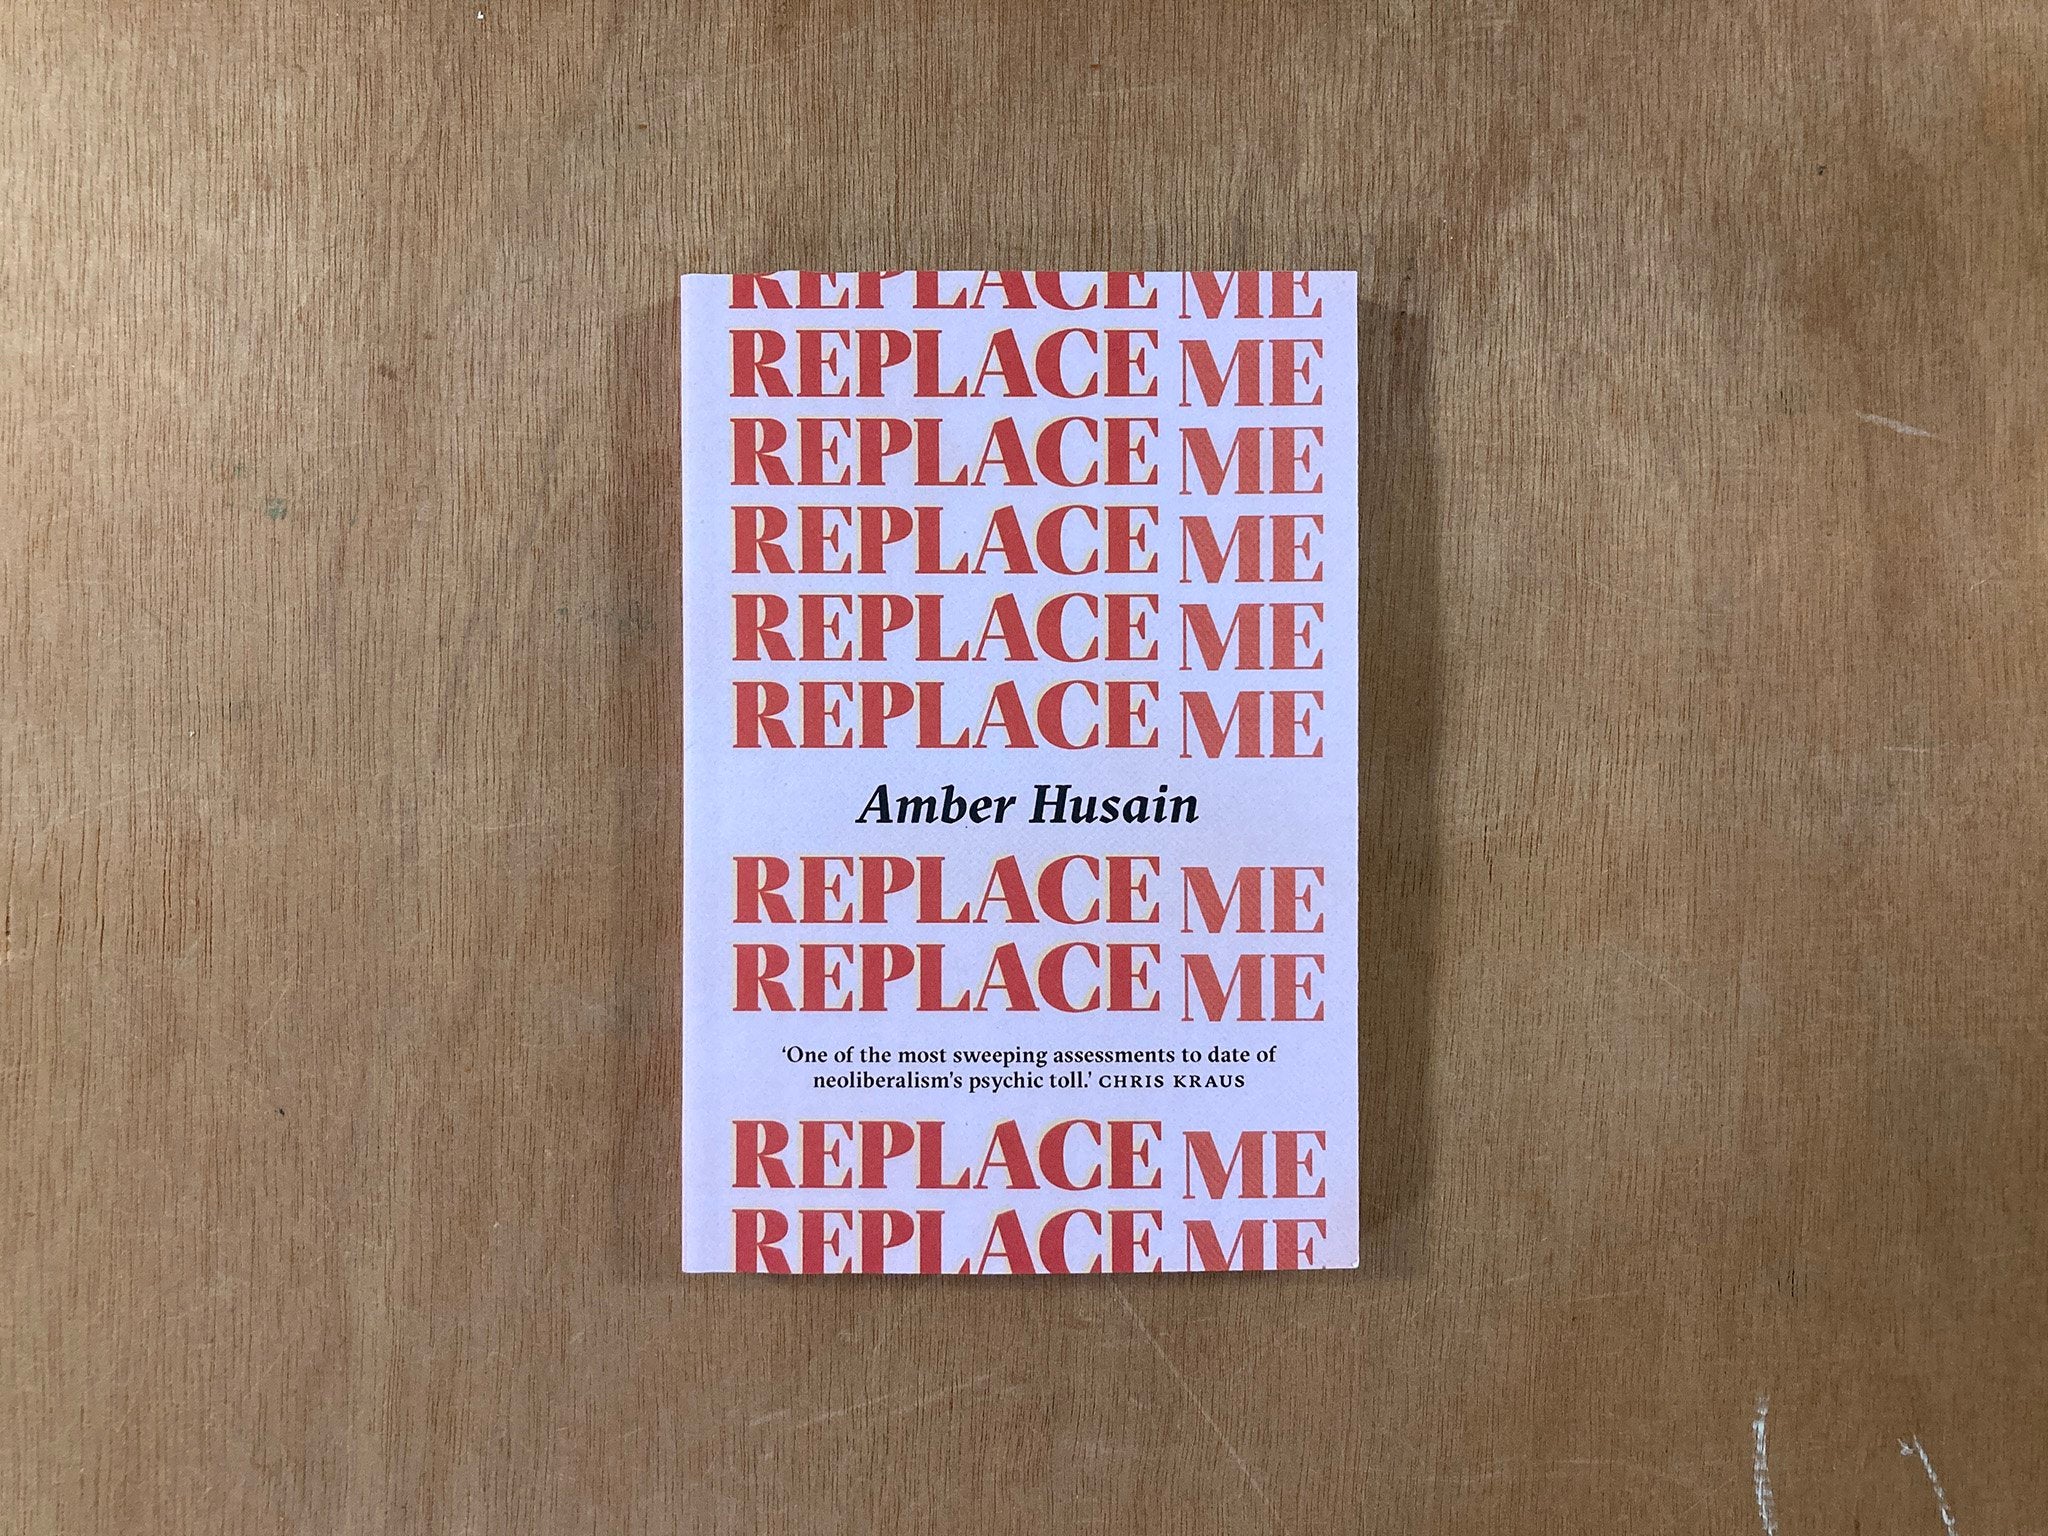 REPLACE ME by Amber Husain